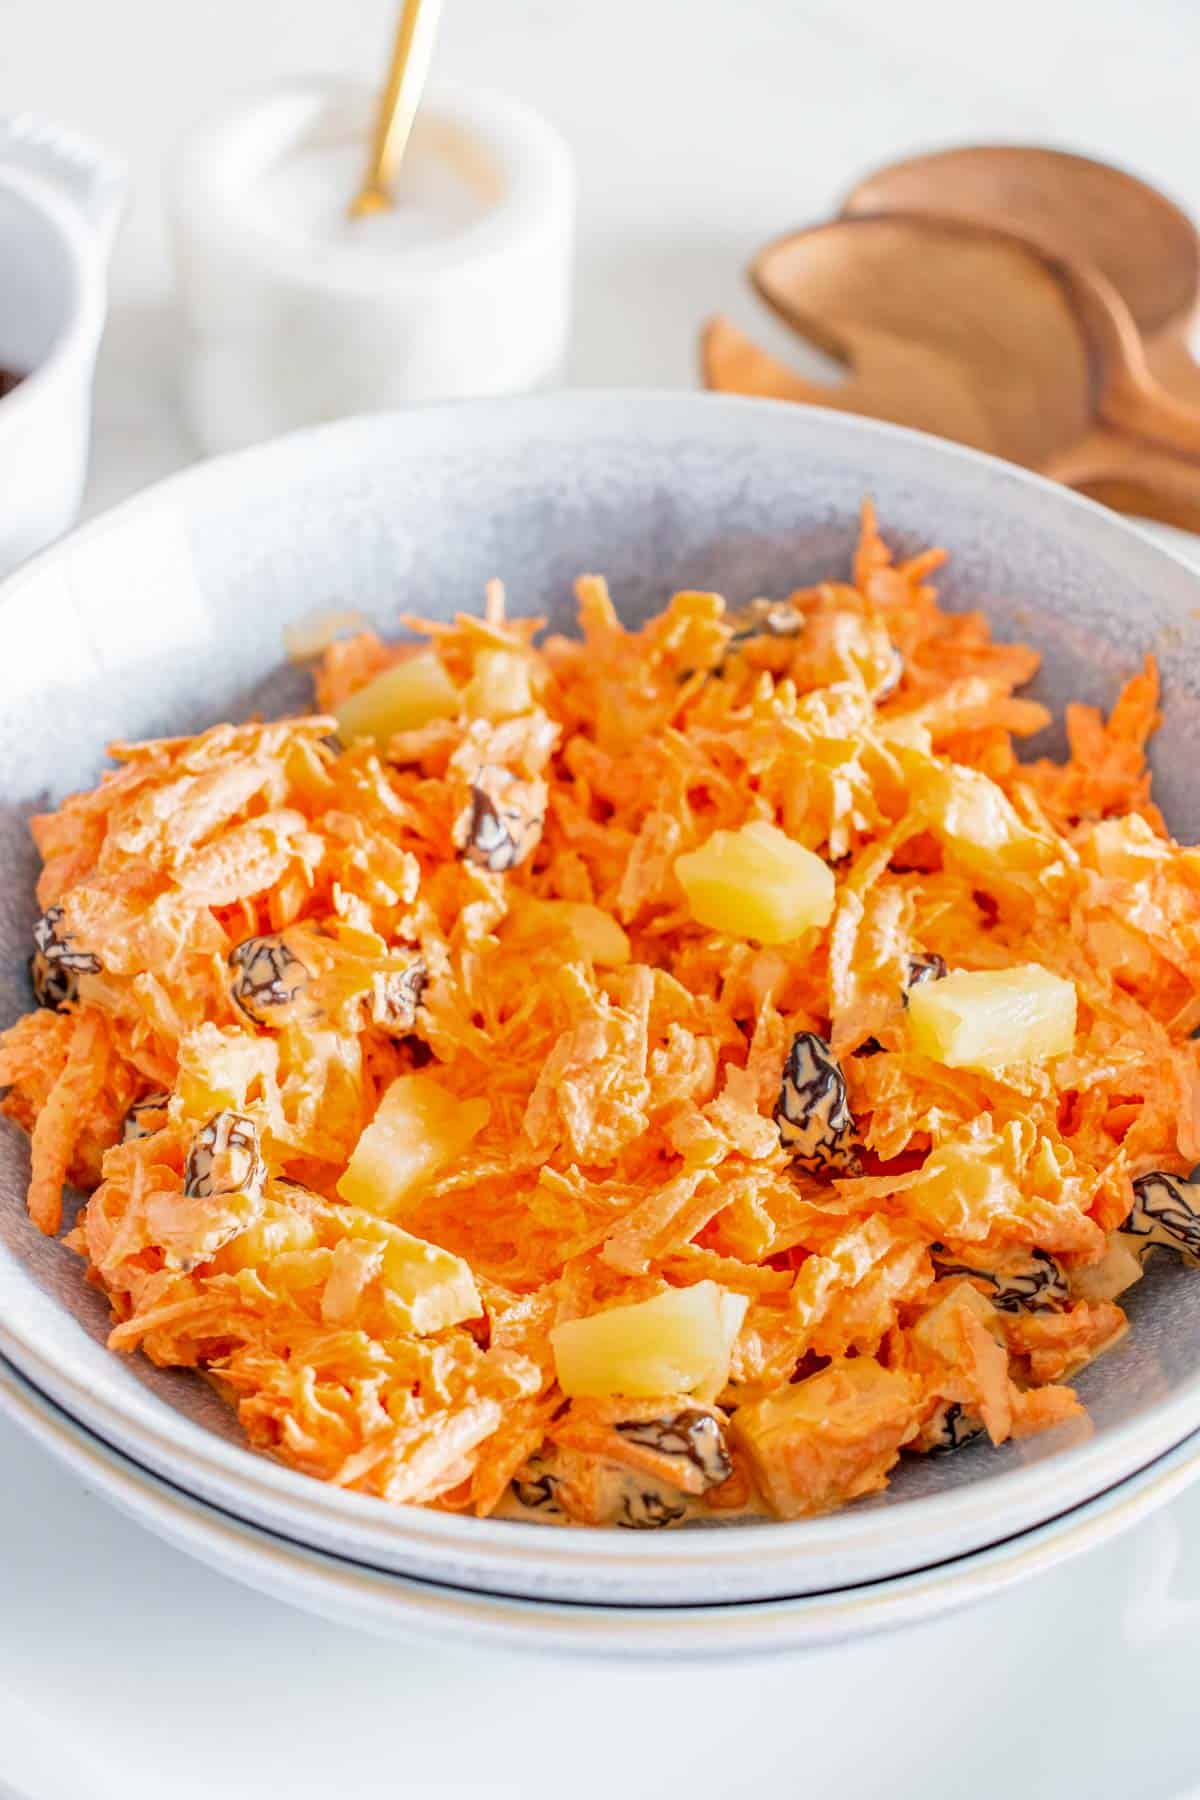 Carrot salad in a bowl on a table.